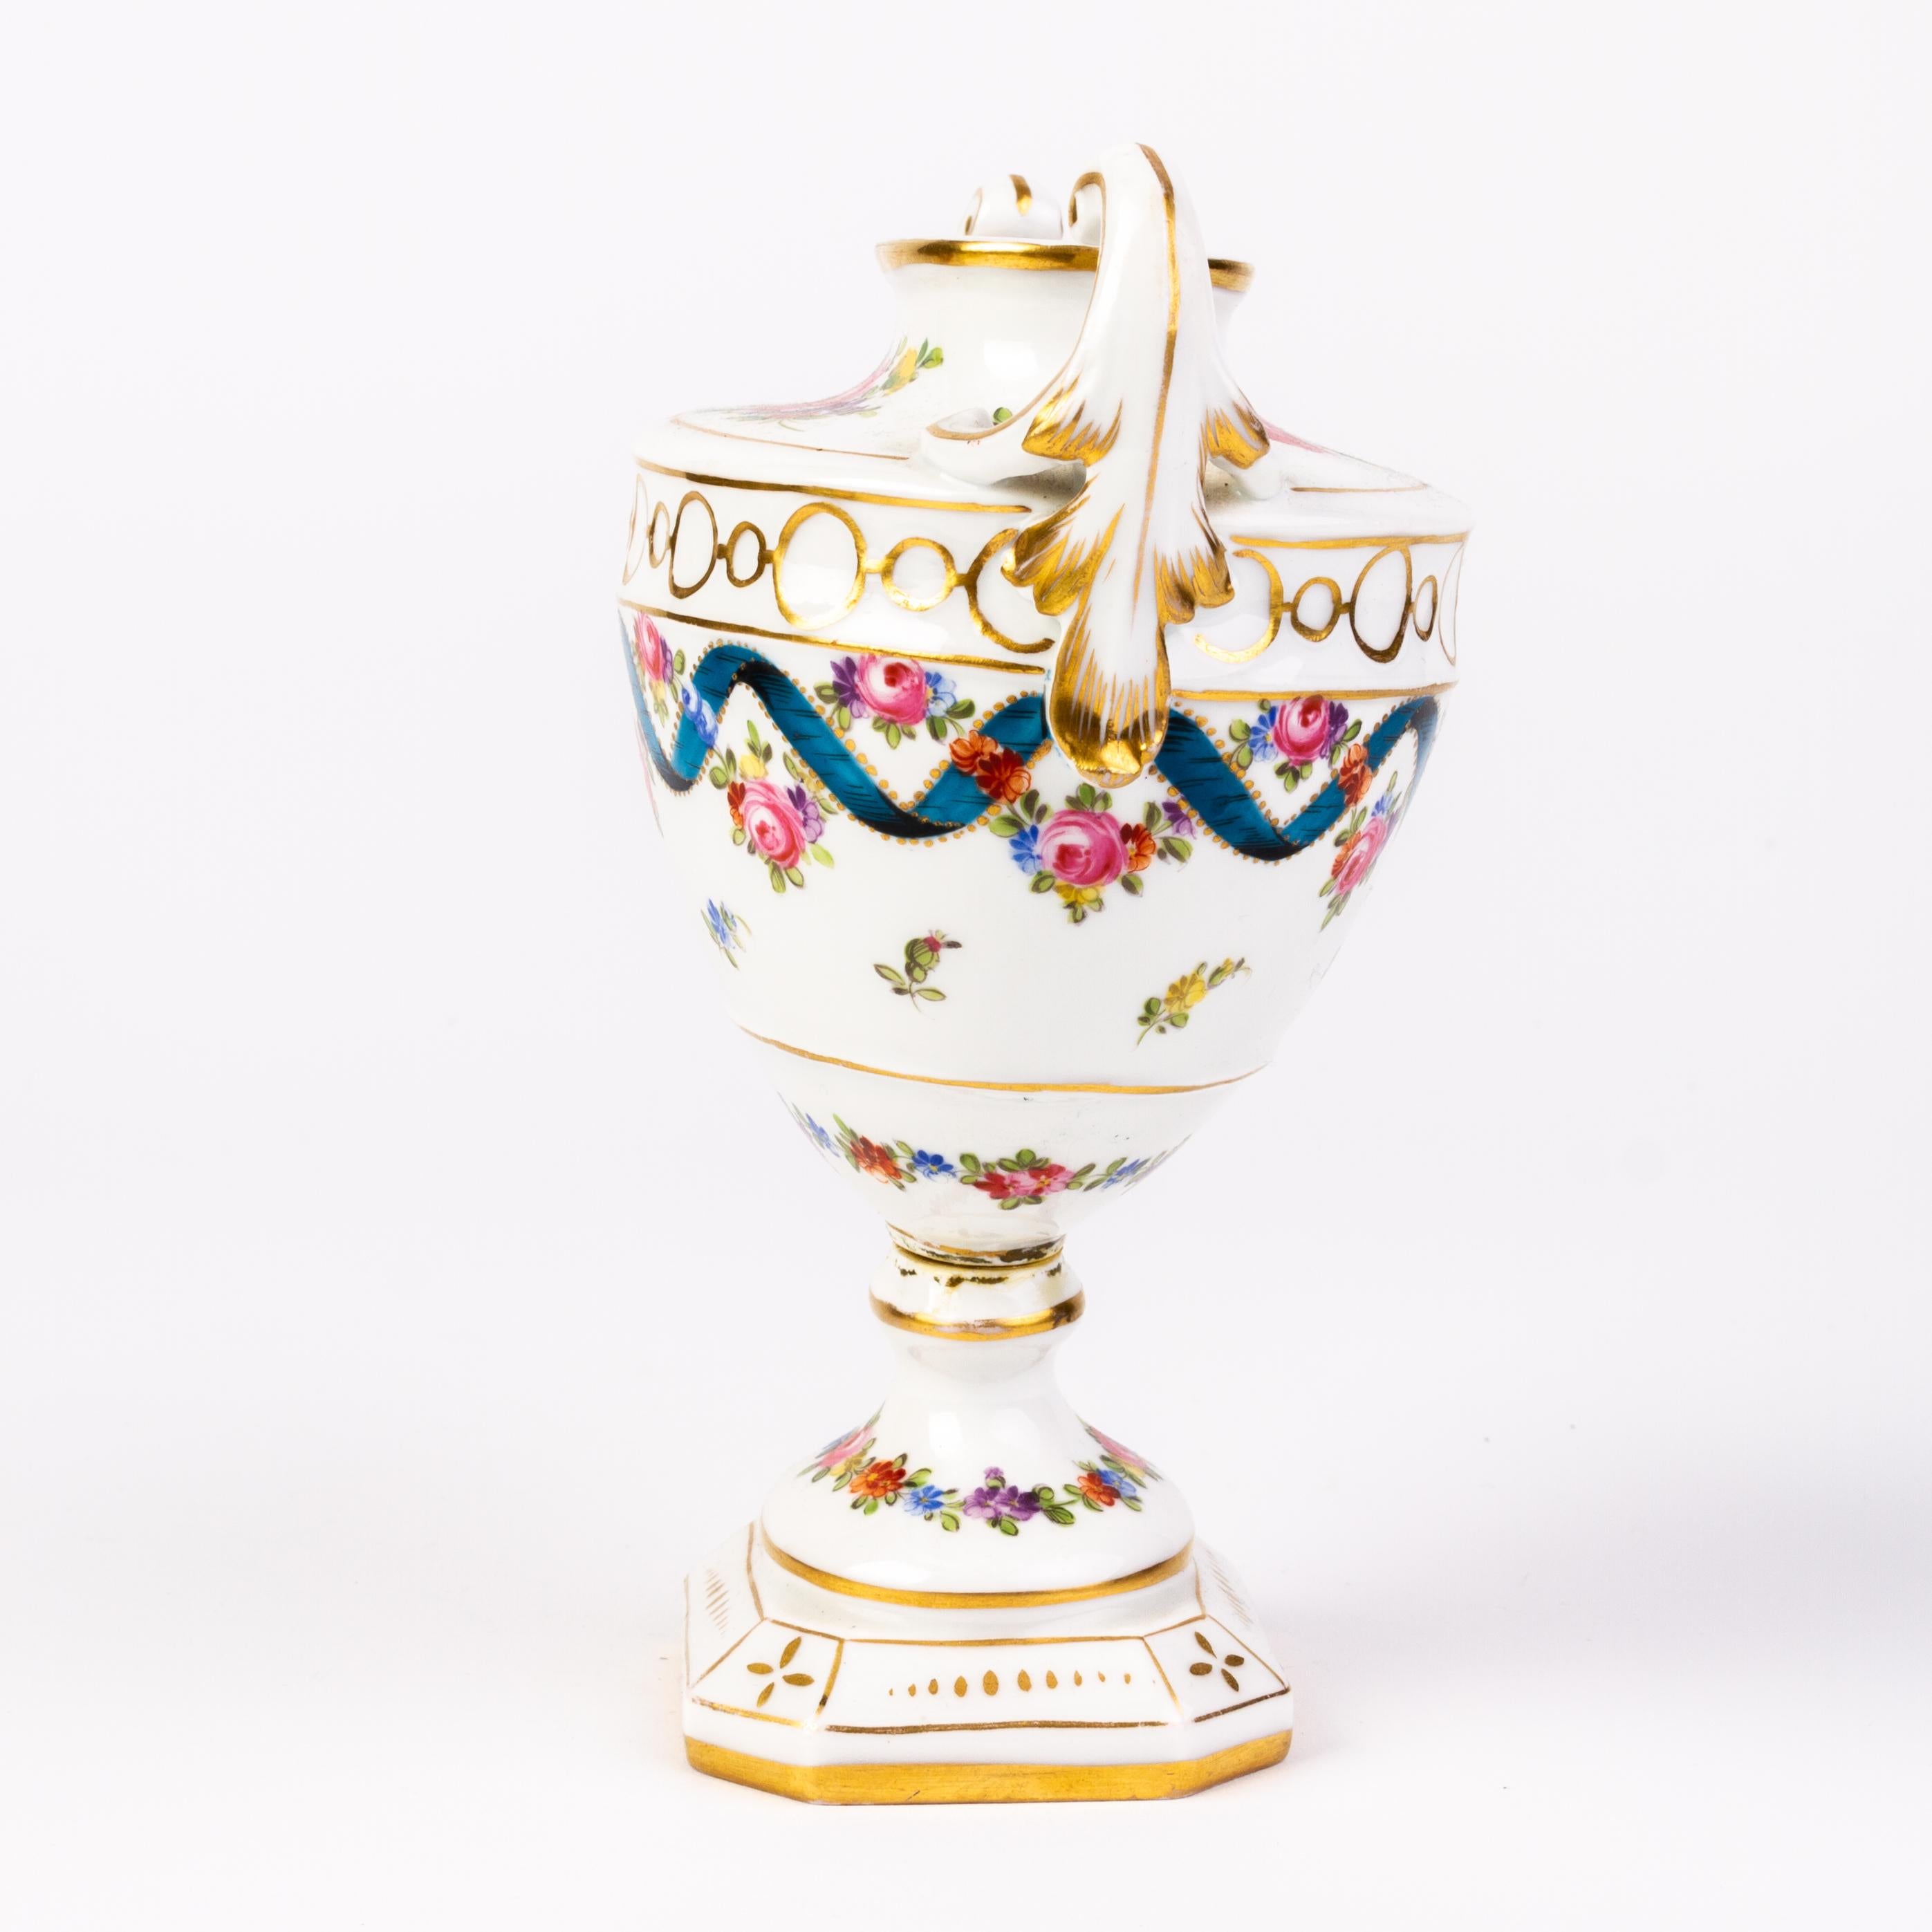 In good condition
From a private collection
Dresden Fine German Porcelain Art Nouveau Urn Vase 